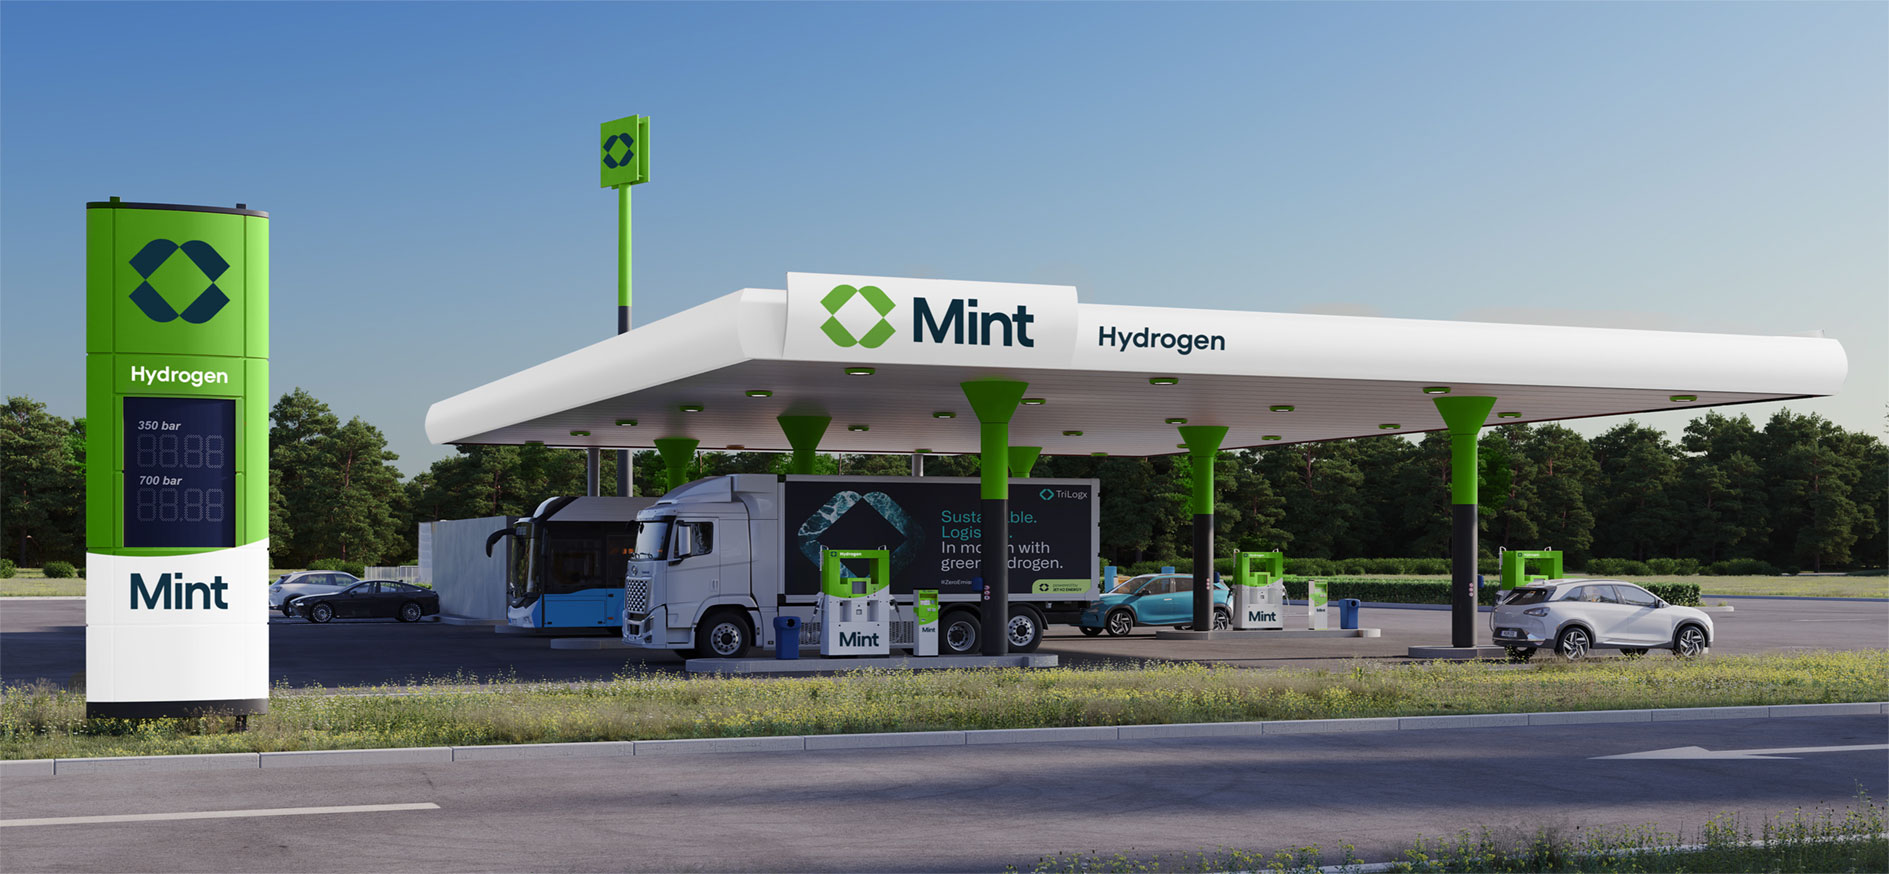 Mint Hydrogen - Refuelling stations for tomorrow's zero-emission mobility